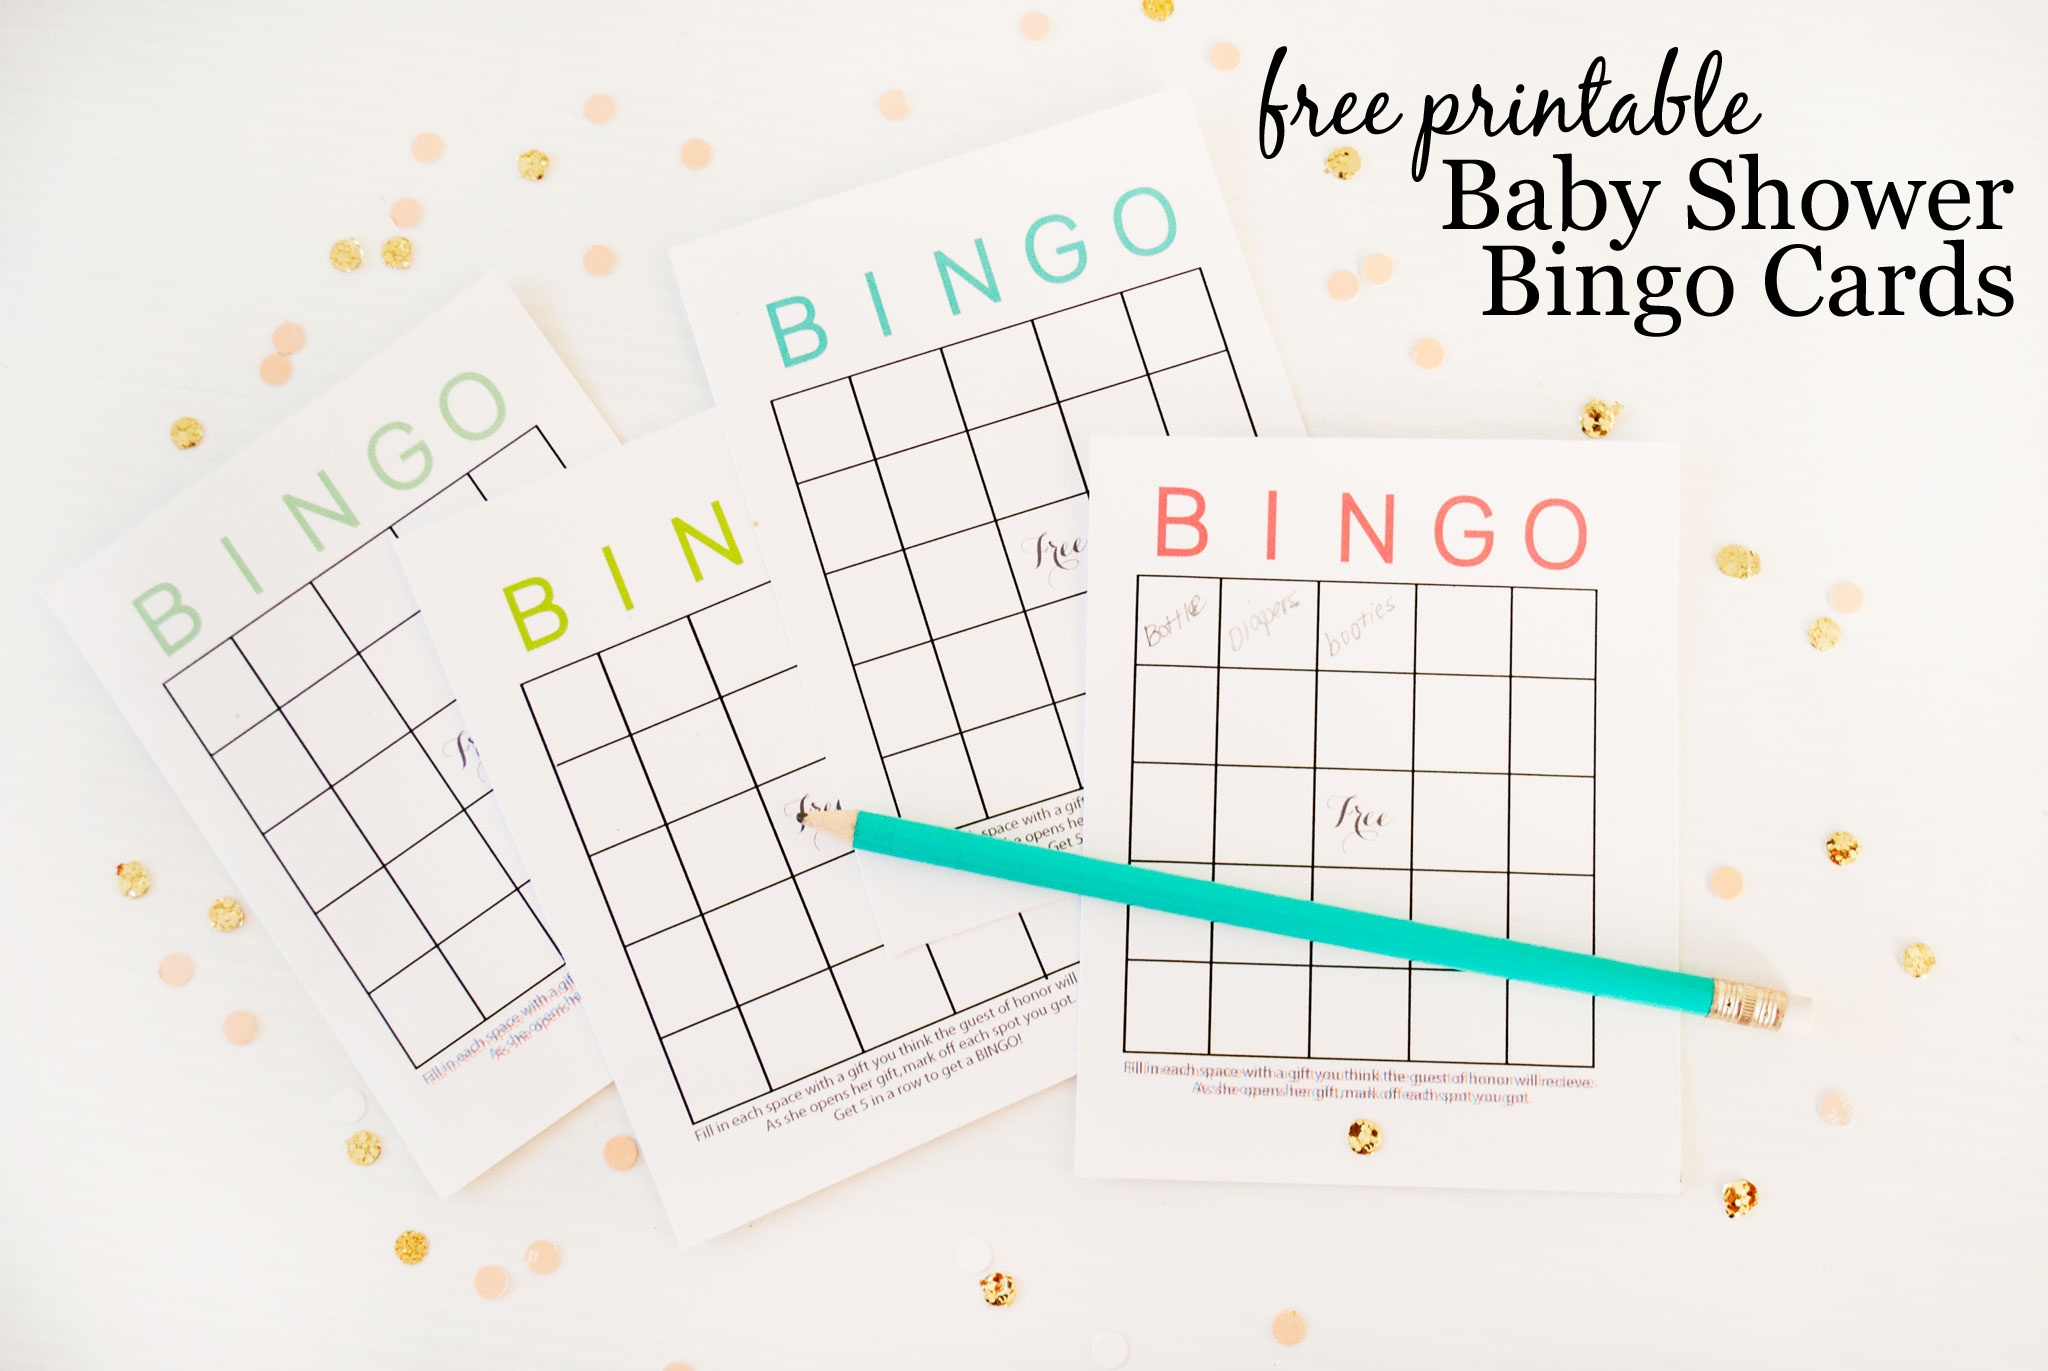 Free Printable Baby Shower Bingo Cards - Project Nursery - 50 Free Printable Baby Bingo Cards